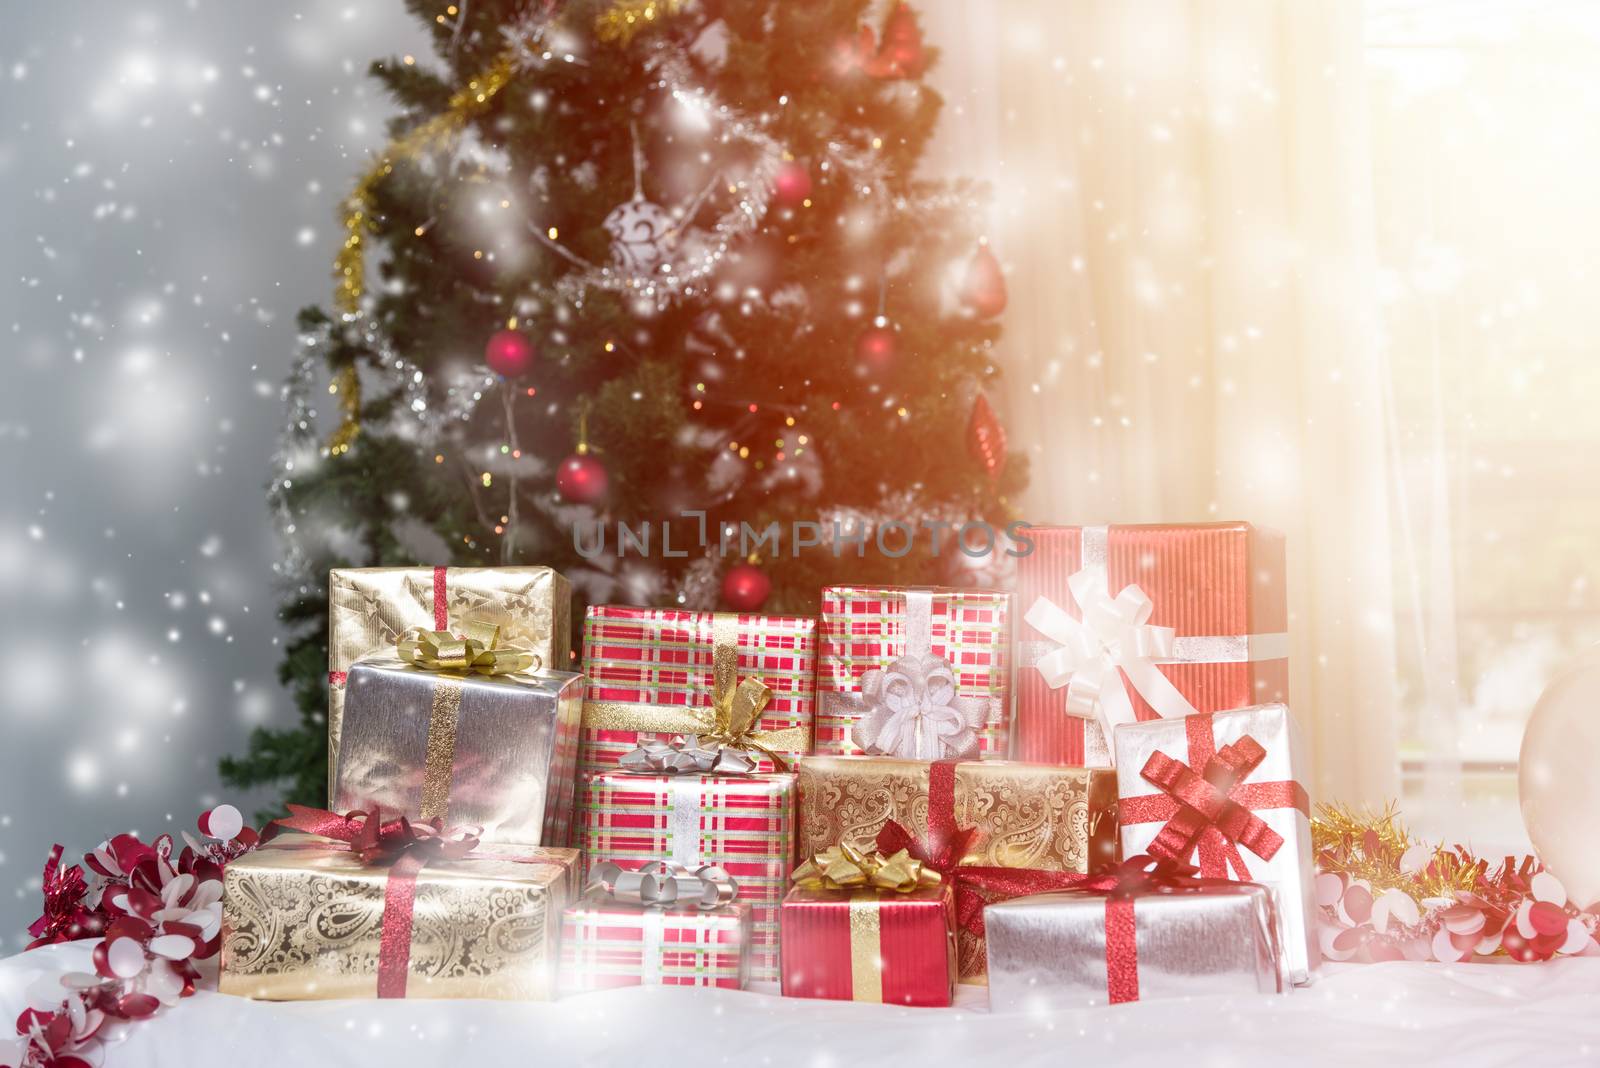 Many Christmas presents gift boxes on a table with Christmas tre by Sorapop